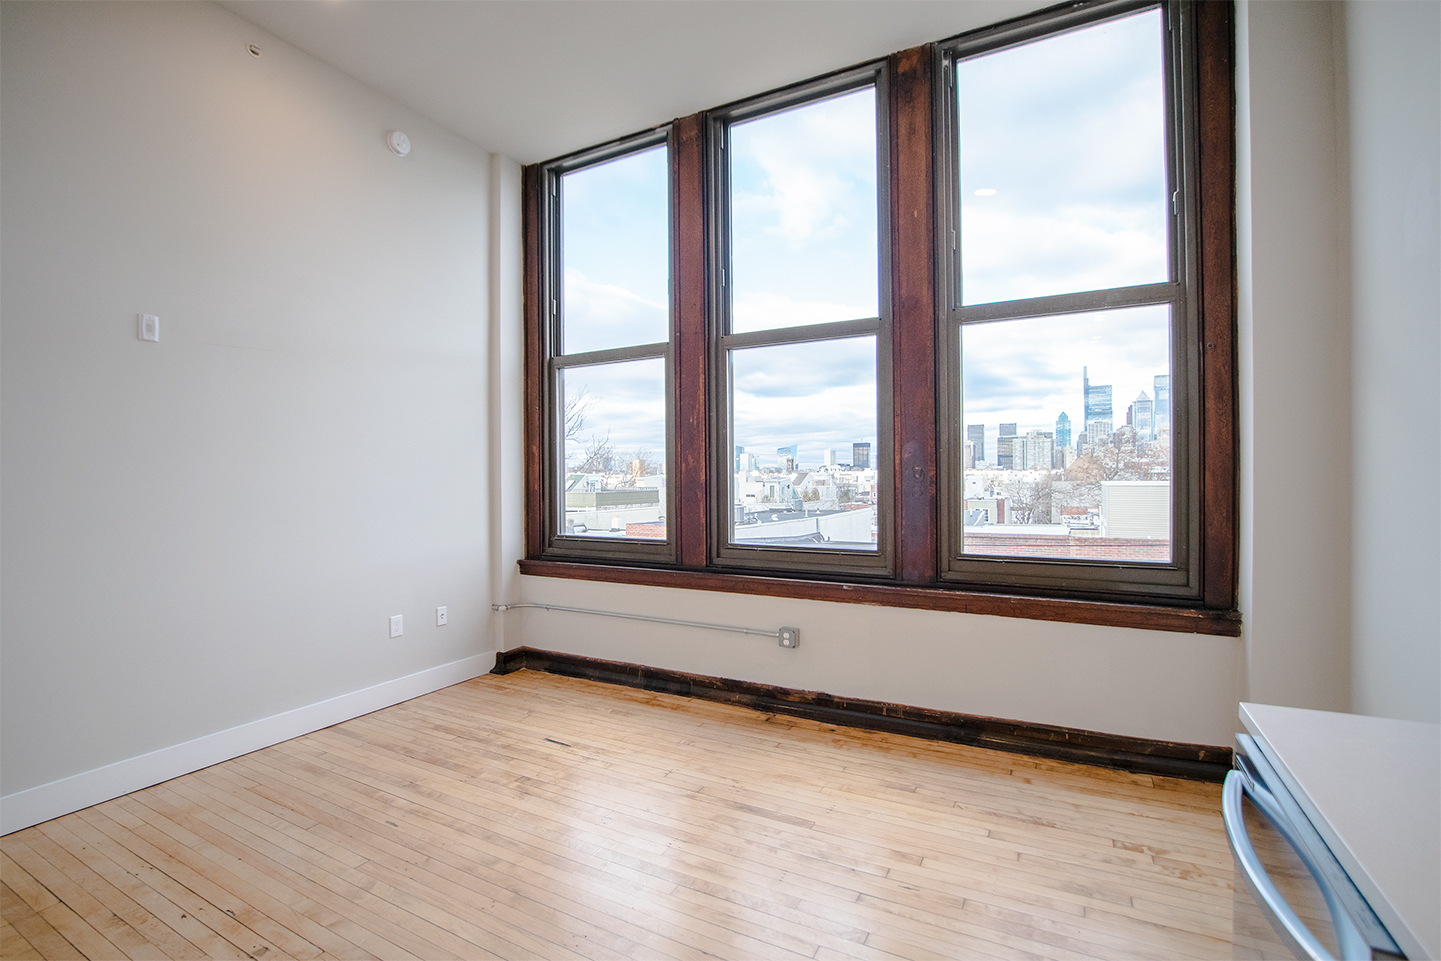 Property Photo For 1300 S. 19th St, Unit 214